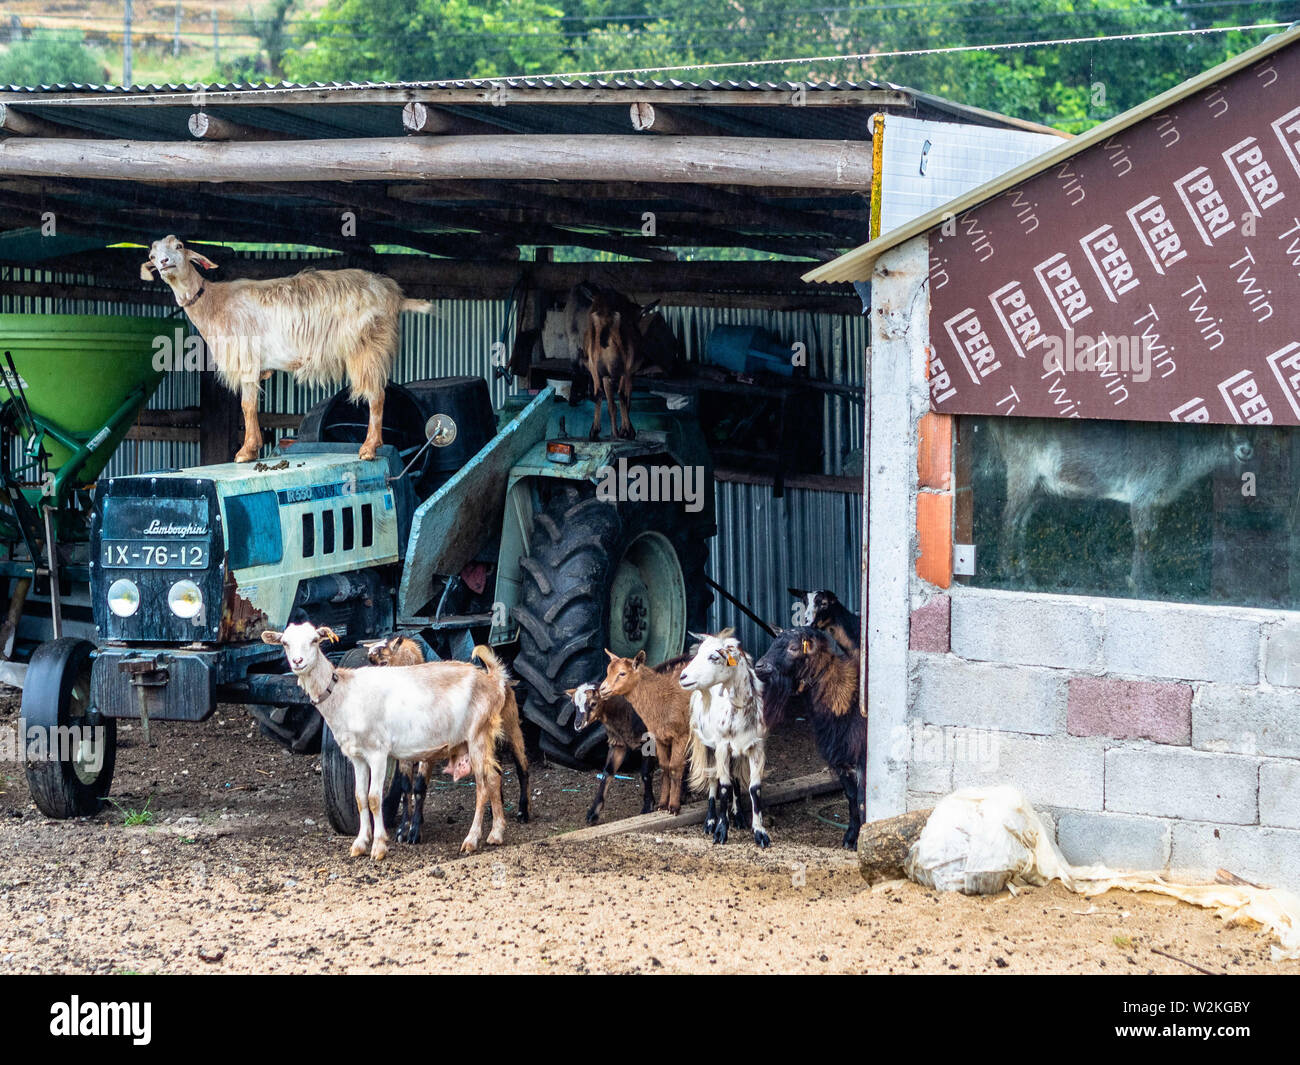 Portugal. 18th June, 2019. A group of goats stand over an agricultural  tractor in a Portuguese farm.The Camino de Santiago (the Way of St. James)  is a large network of ancient pilgrim